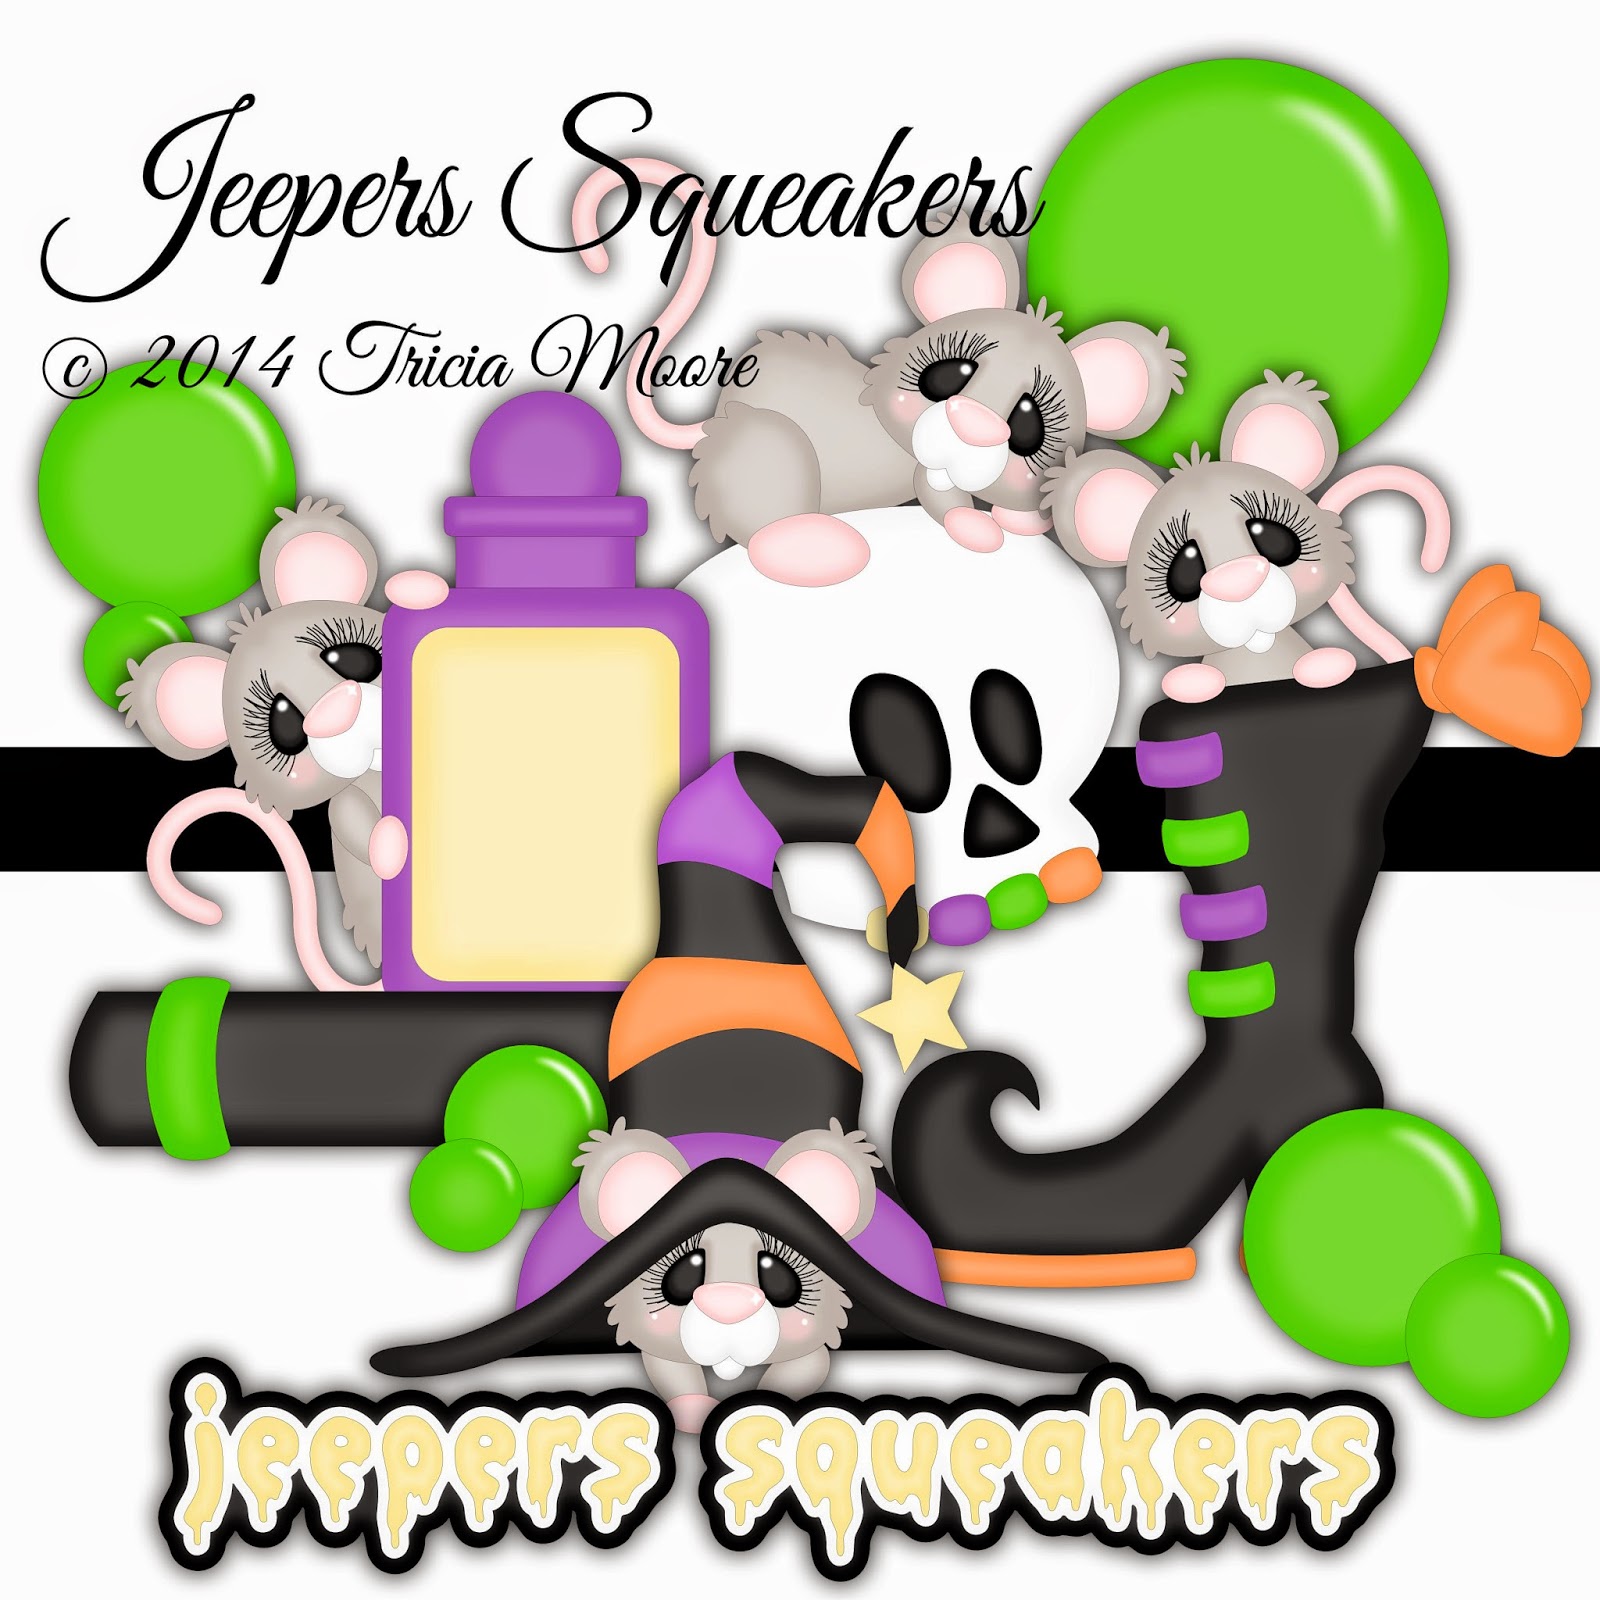 http://www.littlescrapsofheavendesigns.com/item_1198/Jeepers-Squeakers.htm